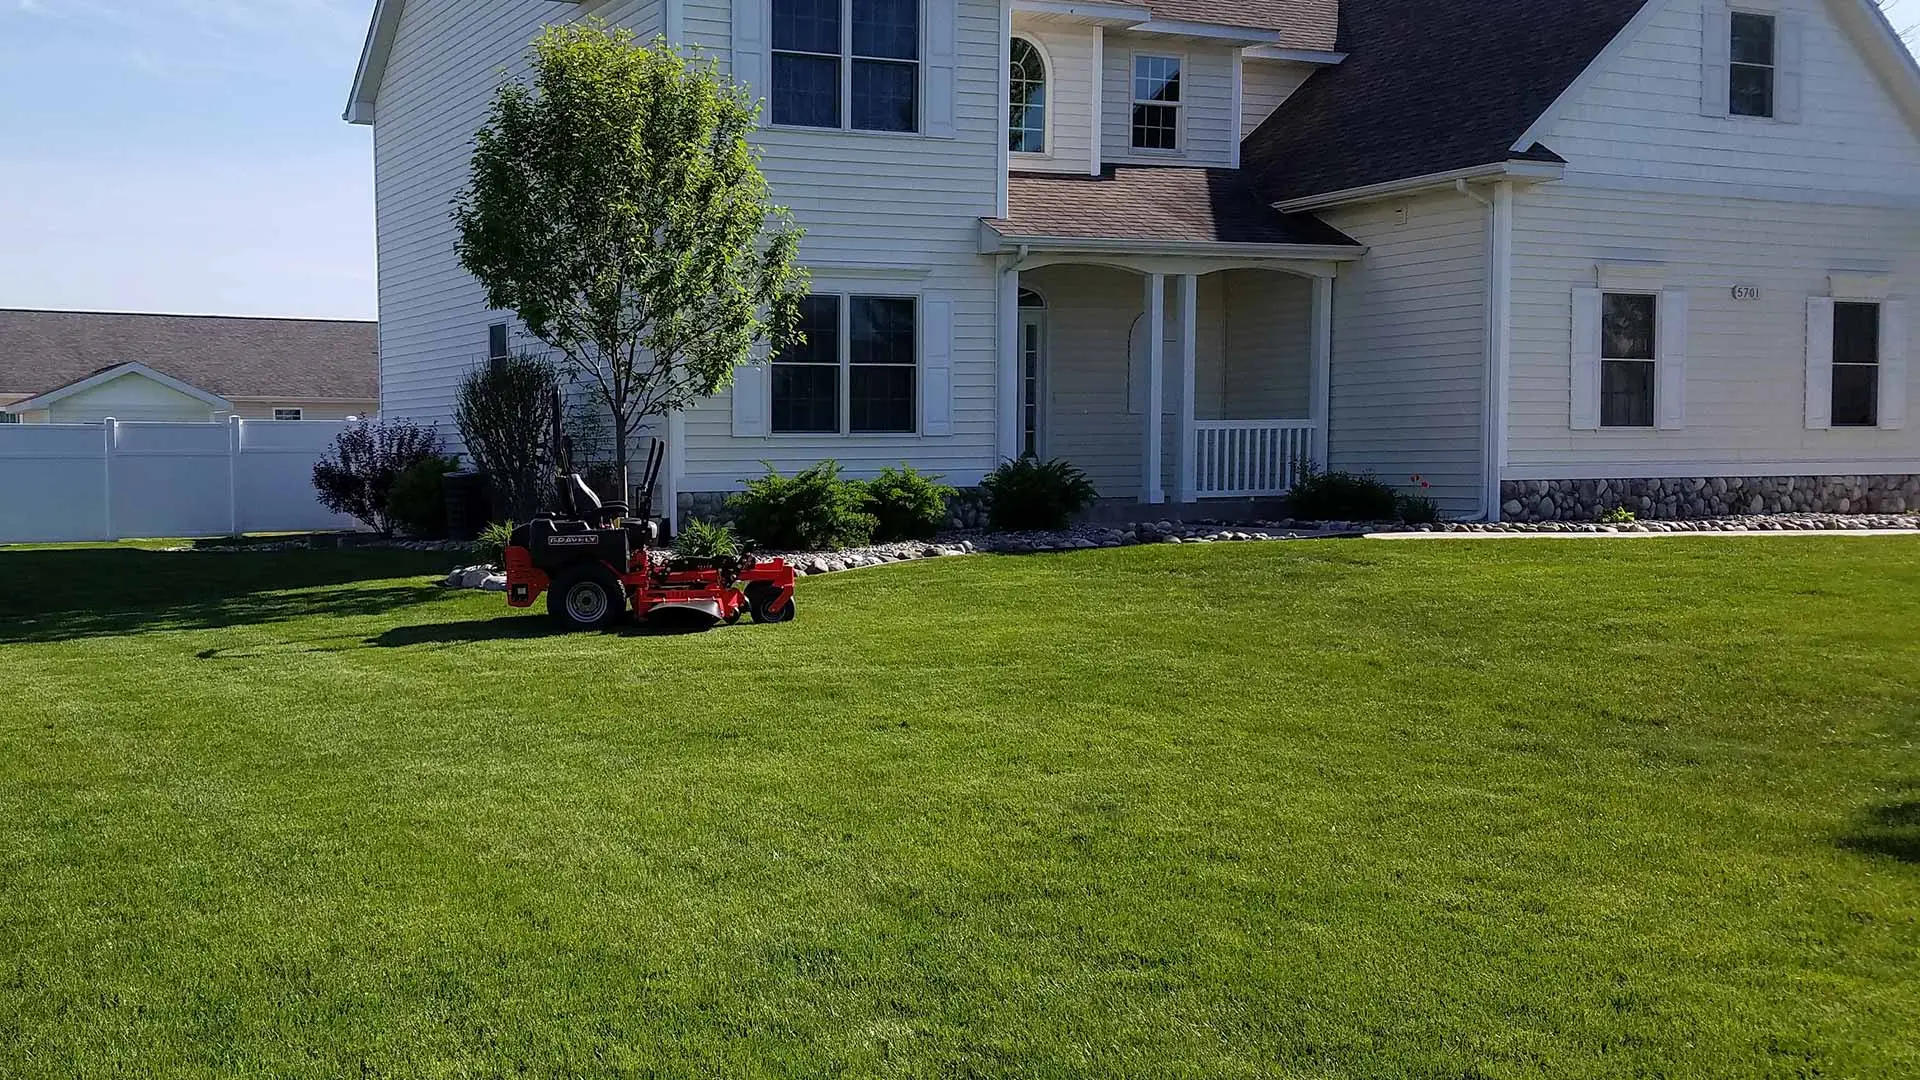 A Midland, MI home with recent lawn mowing services.